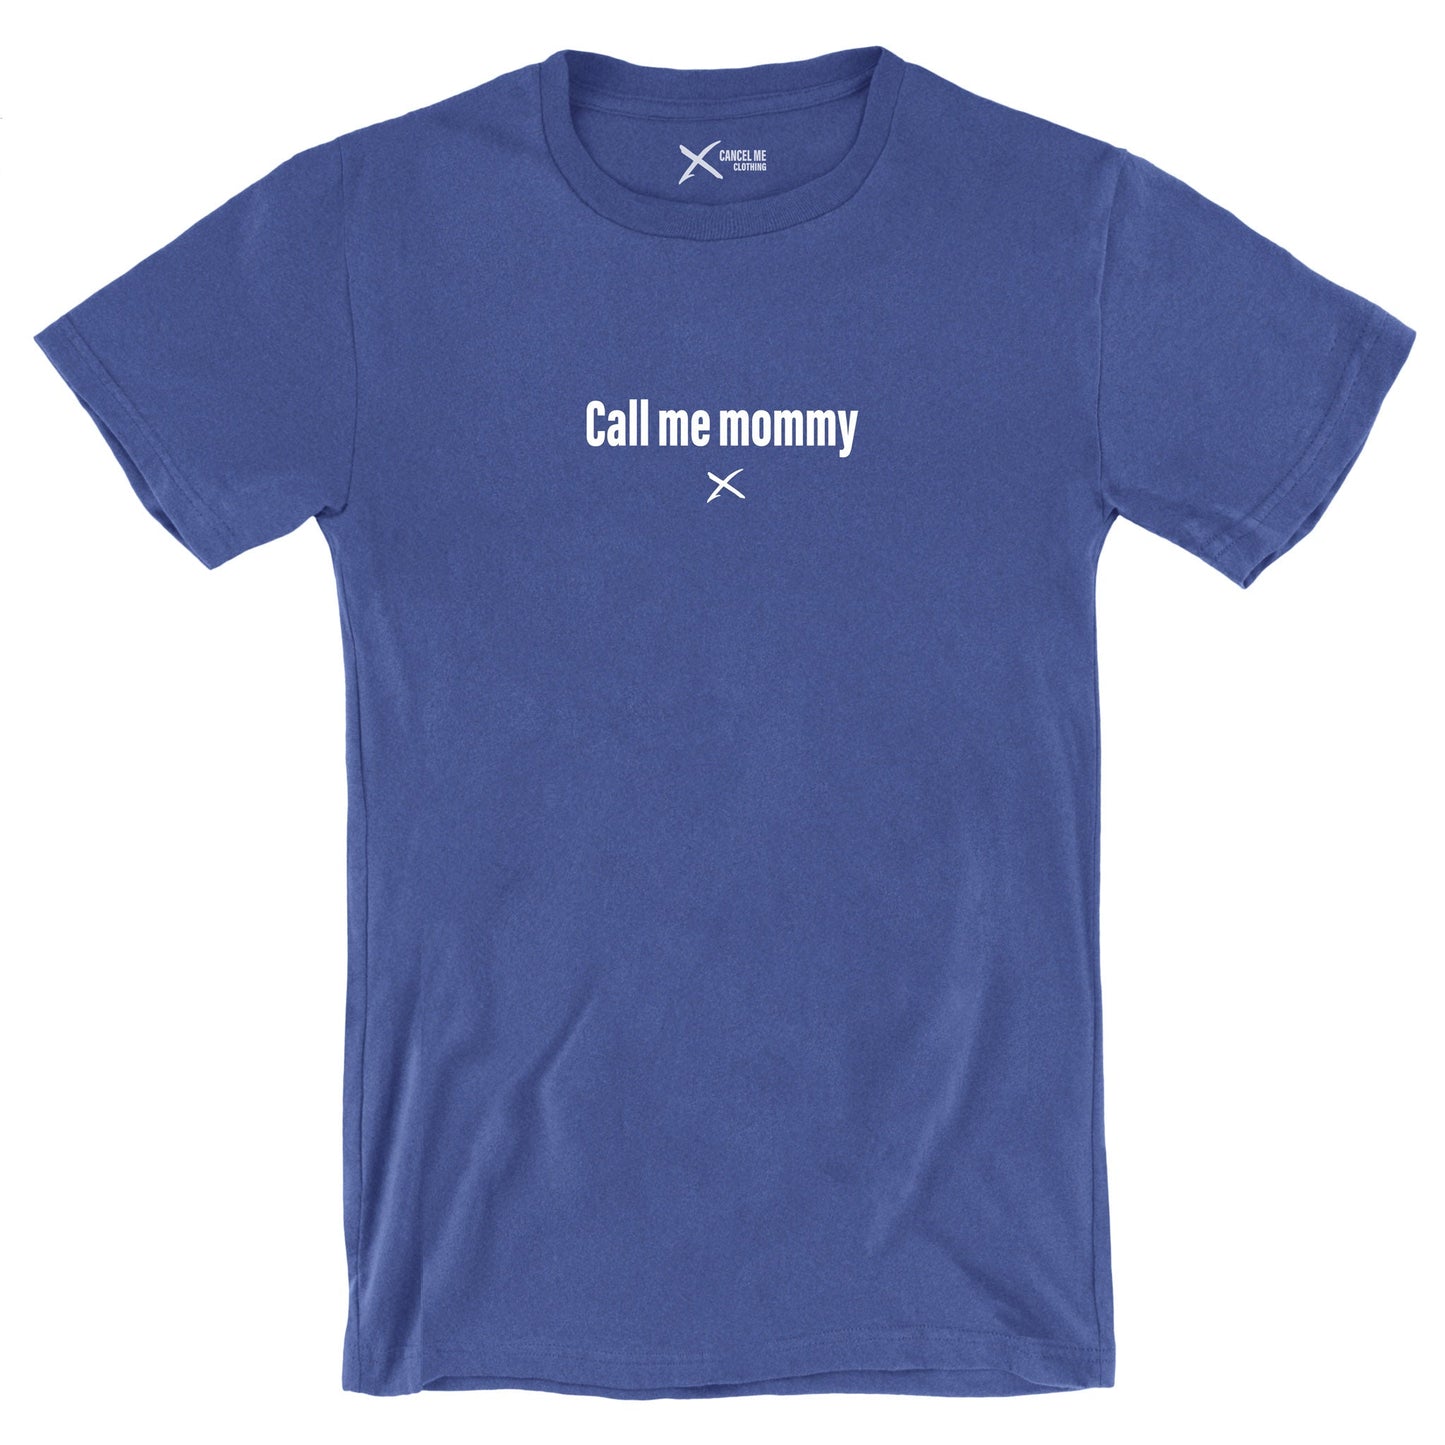 Call me mommy - Shirt